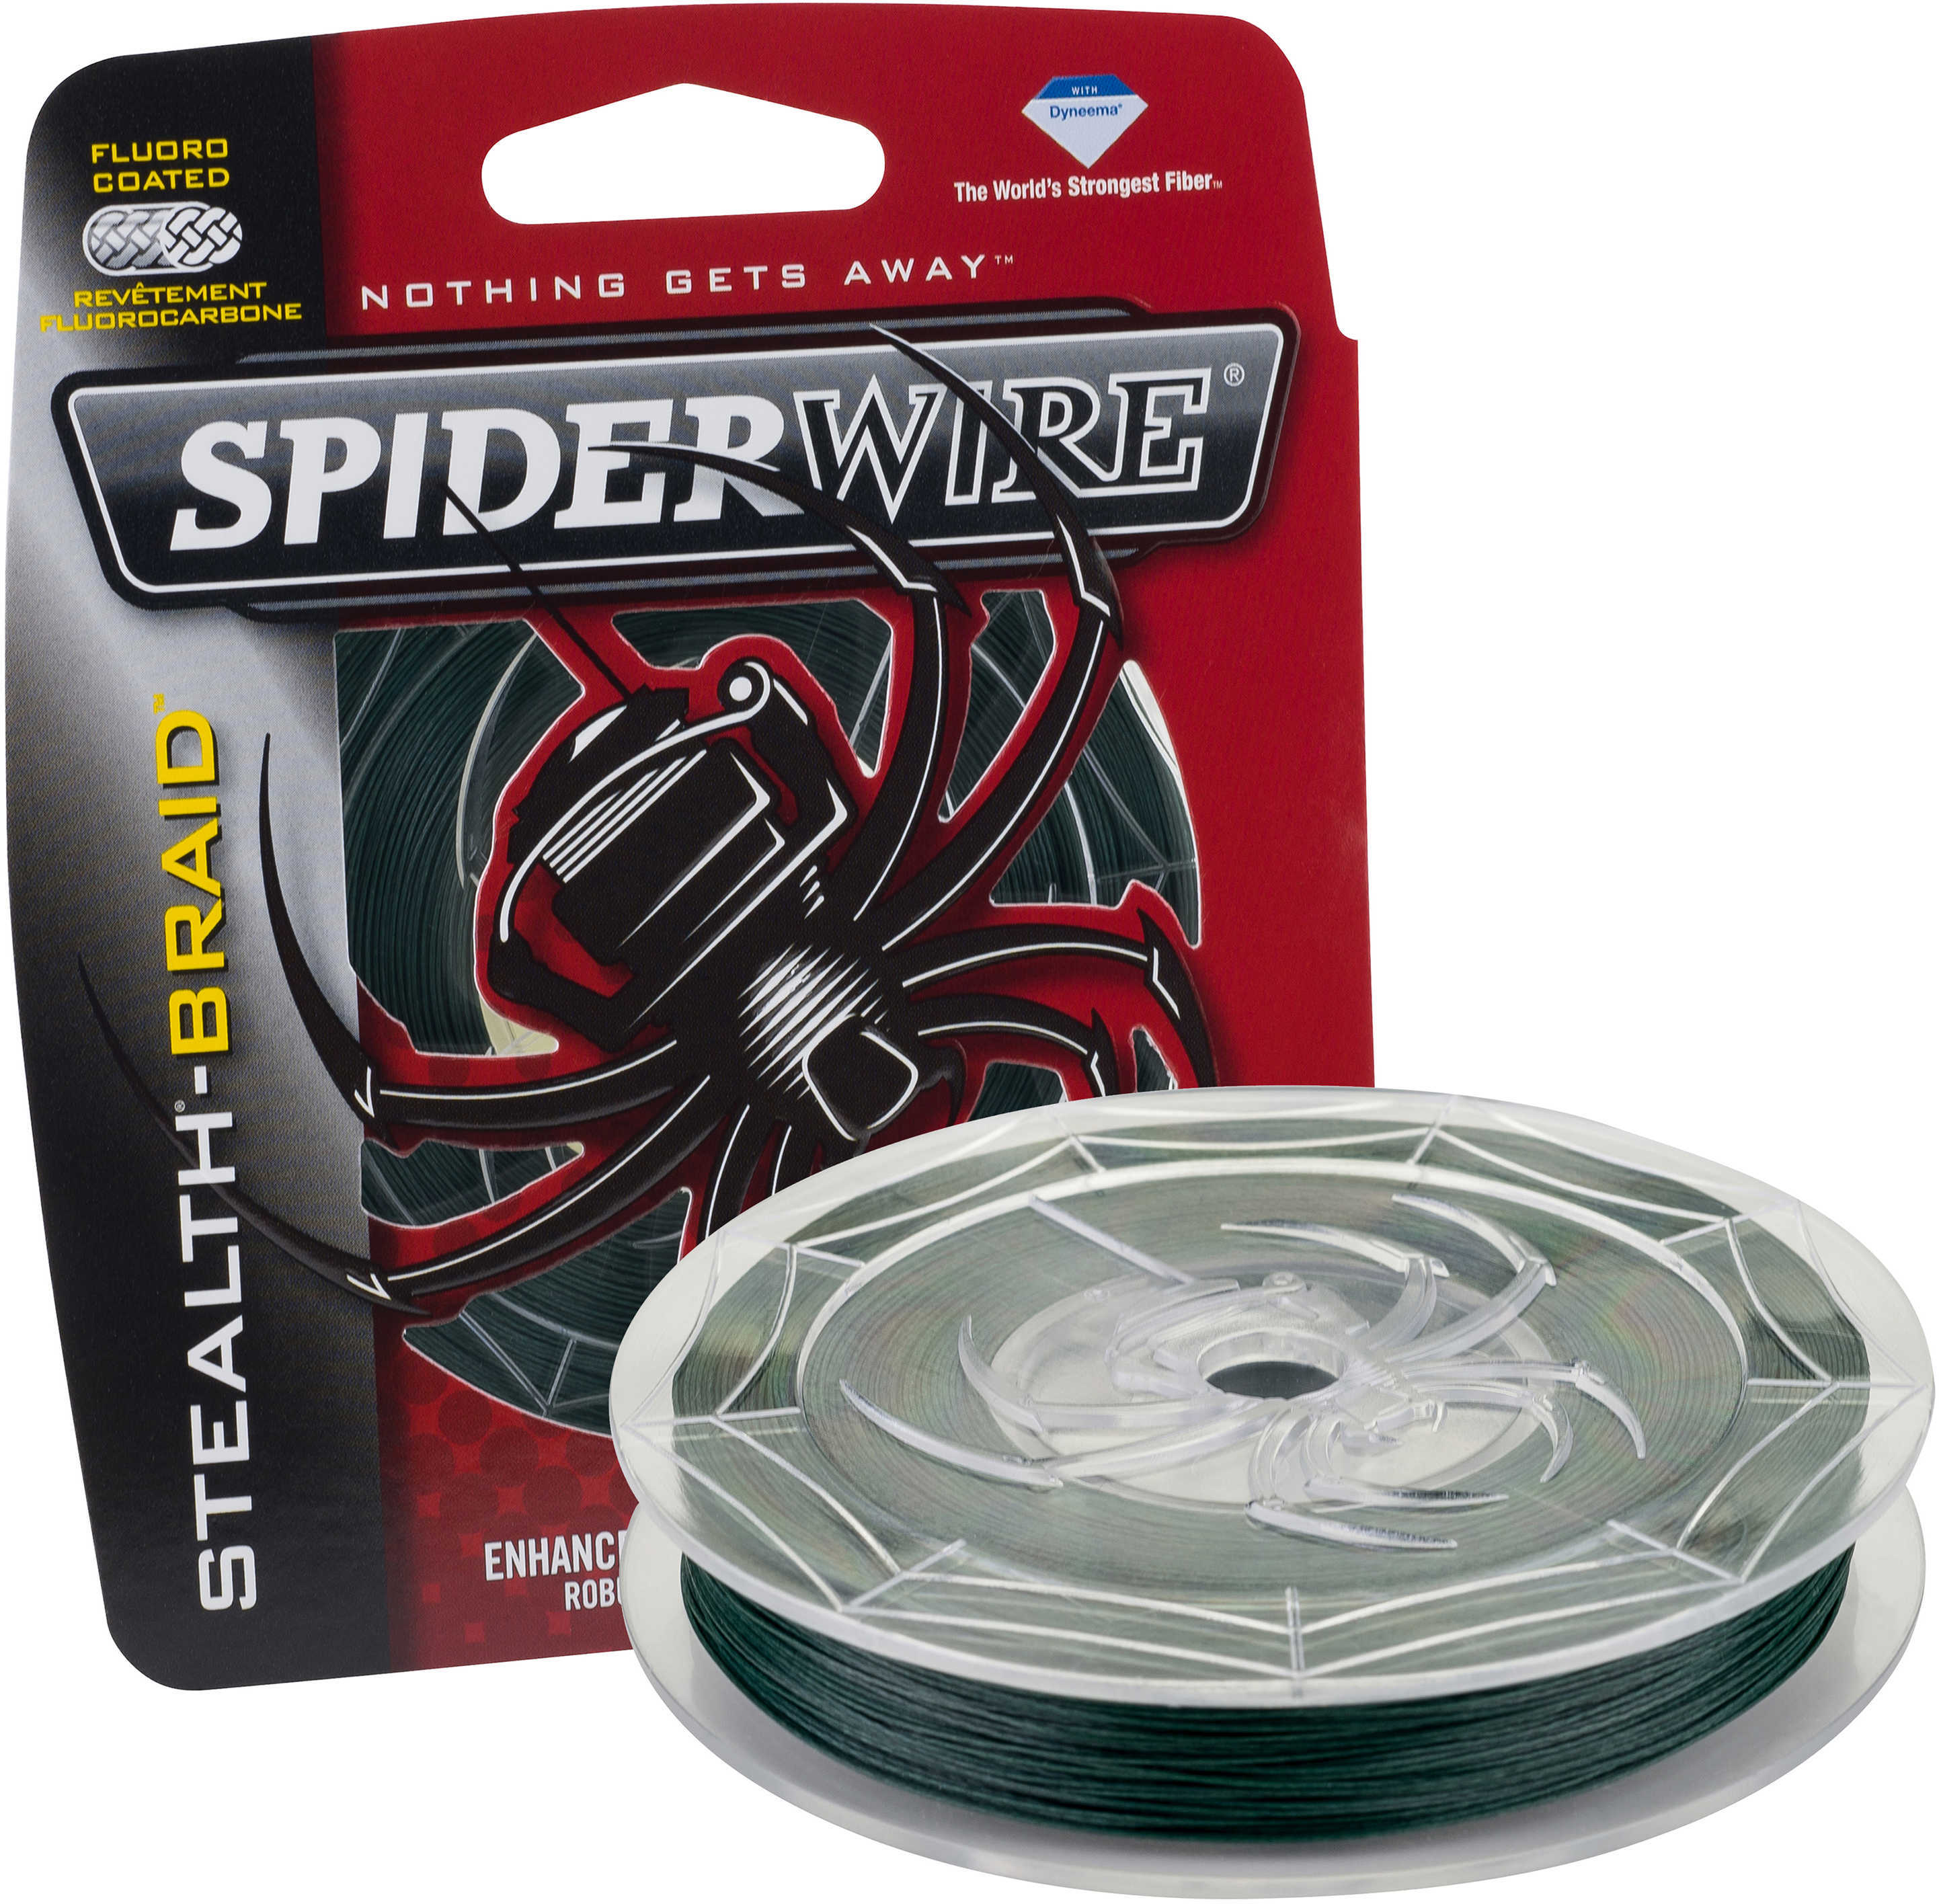 Spiderwire Stealth Braid 200 Yards , 50 lbs Strength, 0.014" Diameter, Moss Green Md: 1374602